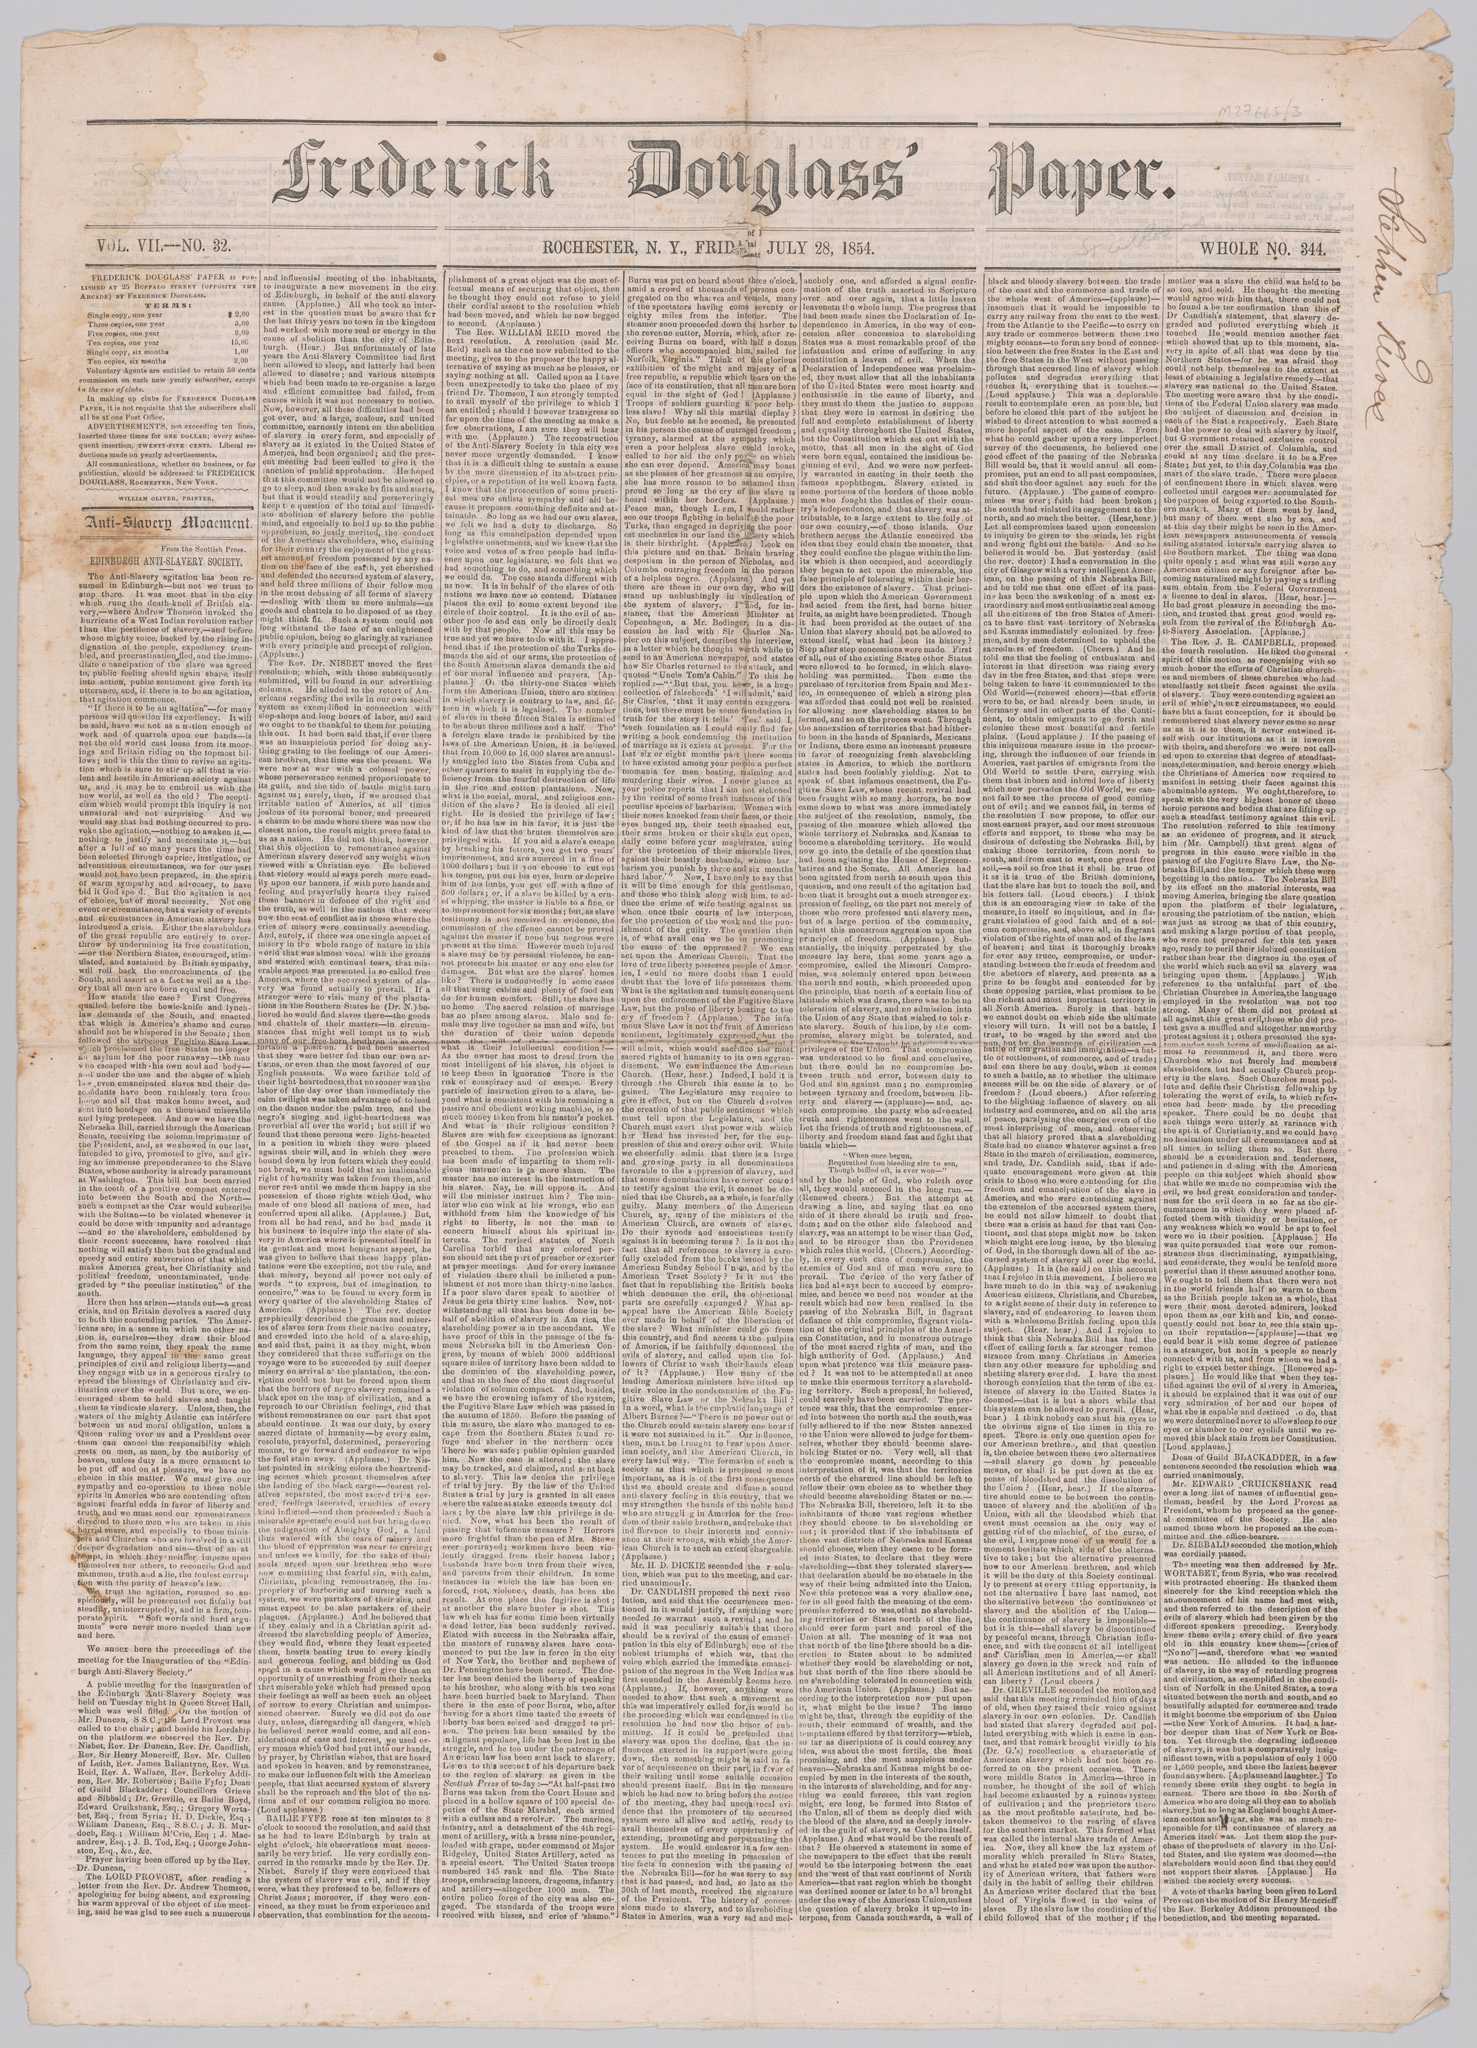 The July 28, 1854 issue of Frederick Douglass' Paper, a Rochester-based weekly newspaper published and edited by Frederick Douglass that centered on antislavery efforts and other social reform causes. The title [Frederick Douglass' Paper] is printed in large text across the top, just underneath the title are the issue details printed between two horizontal black lines: [Vol. VII, No. 32, ROCHESTER, N.Y. FRIDAY JULY 28, 1854., Whole Number 344]. The text of the paper is densely concentrated in seven vertical columns and there is both a vertical and horizontal crease through the center. An inscription of the name [Stephen Reeves] is written in black ink at the top right corner of the front page. The last page contains a large advertisement: "Call for a National Emigration Convention of Colored Men to be held in Cleveland Ohio" and is signed in print by Martin R. Delany.